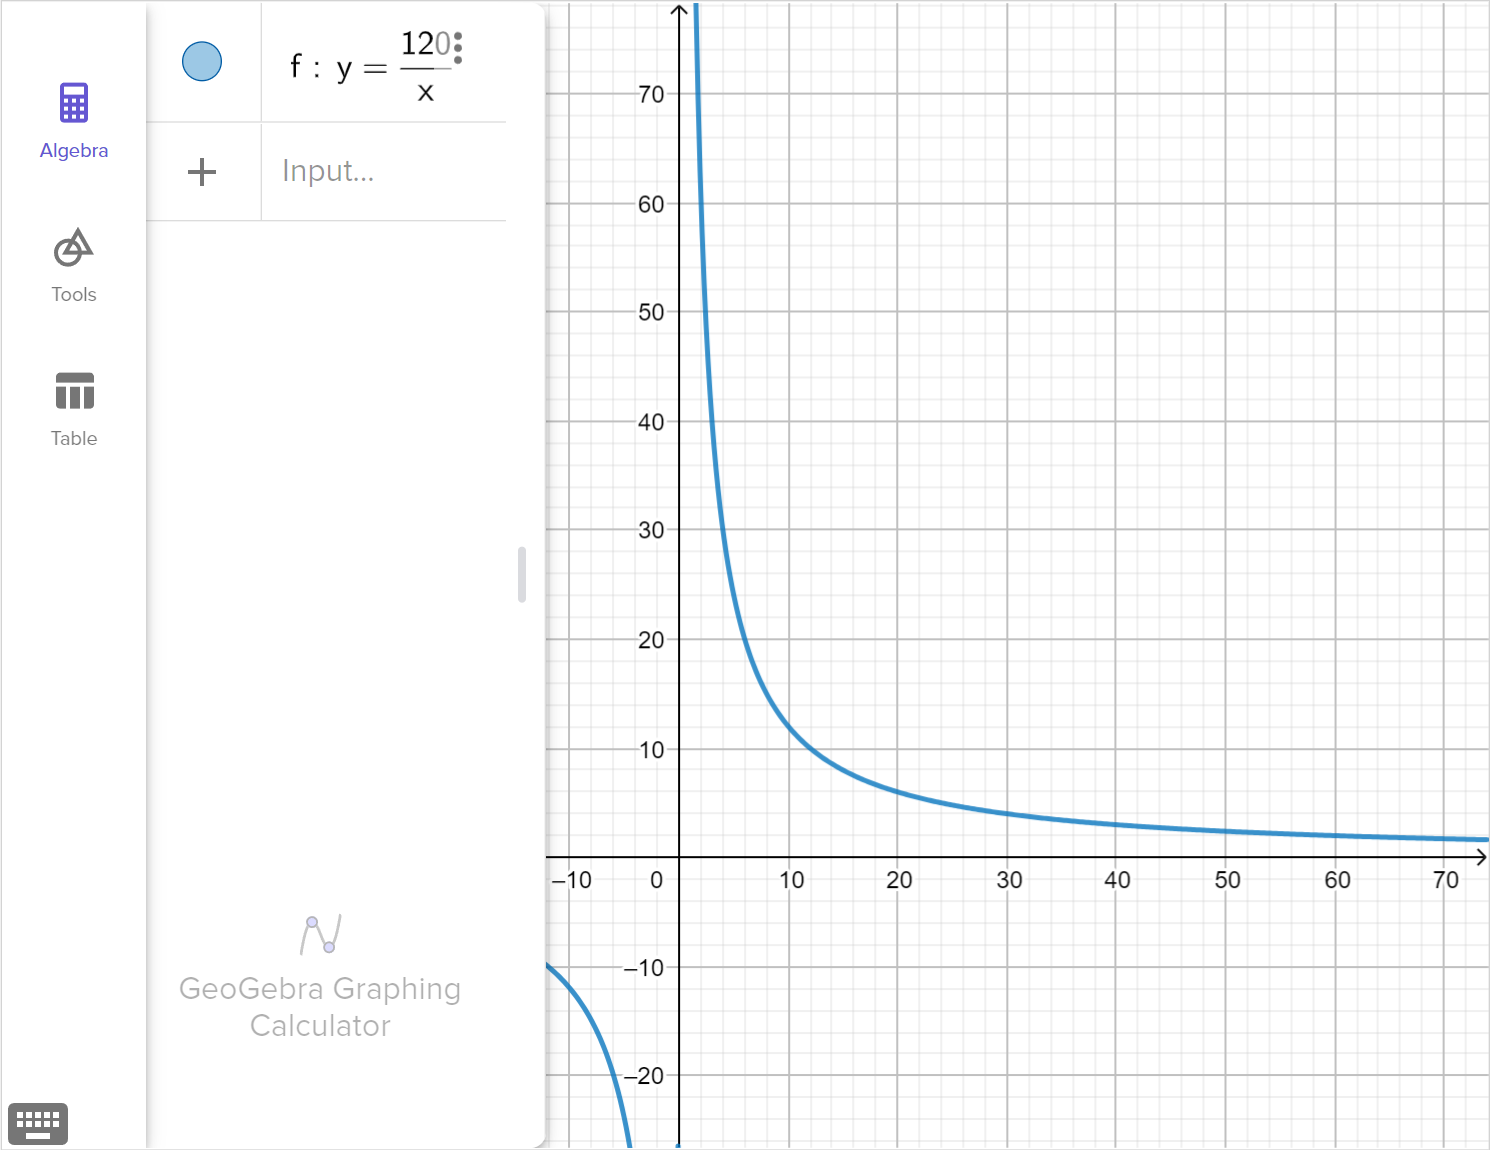 A screenshot of the GeoGebra graphing calculator showing the graph of y equals 120 over x. Speak to your teacher for more details.